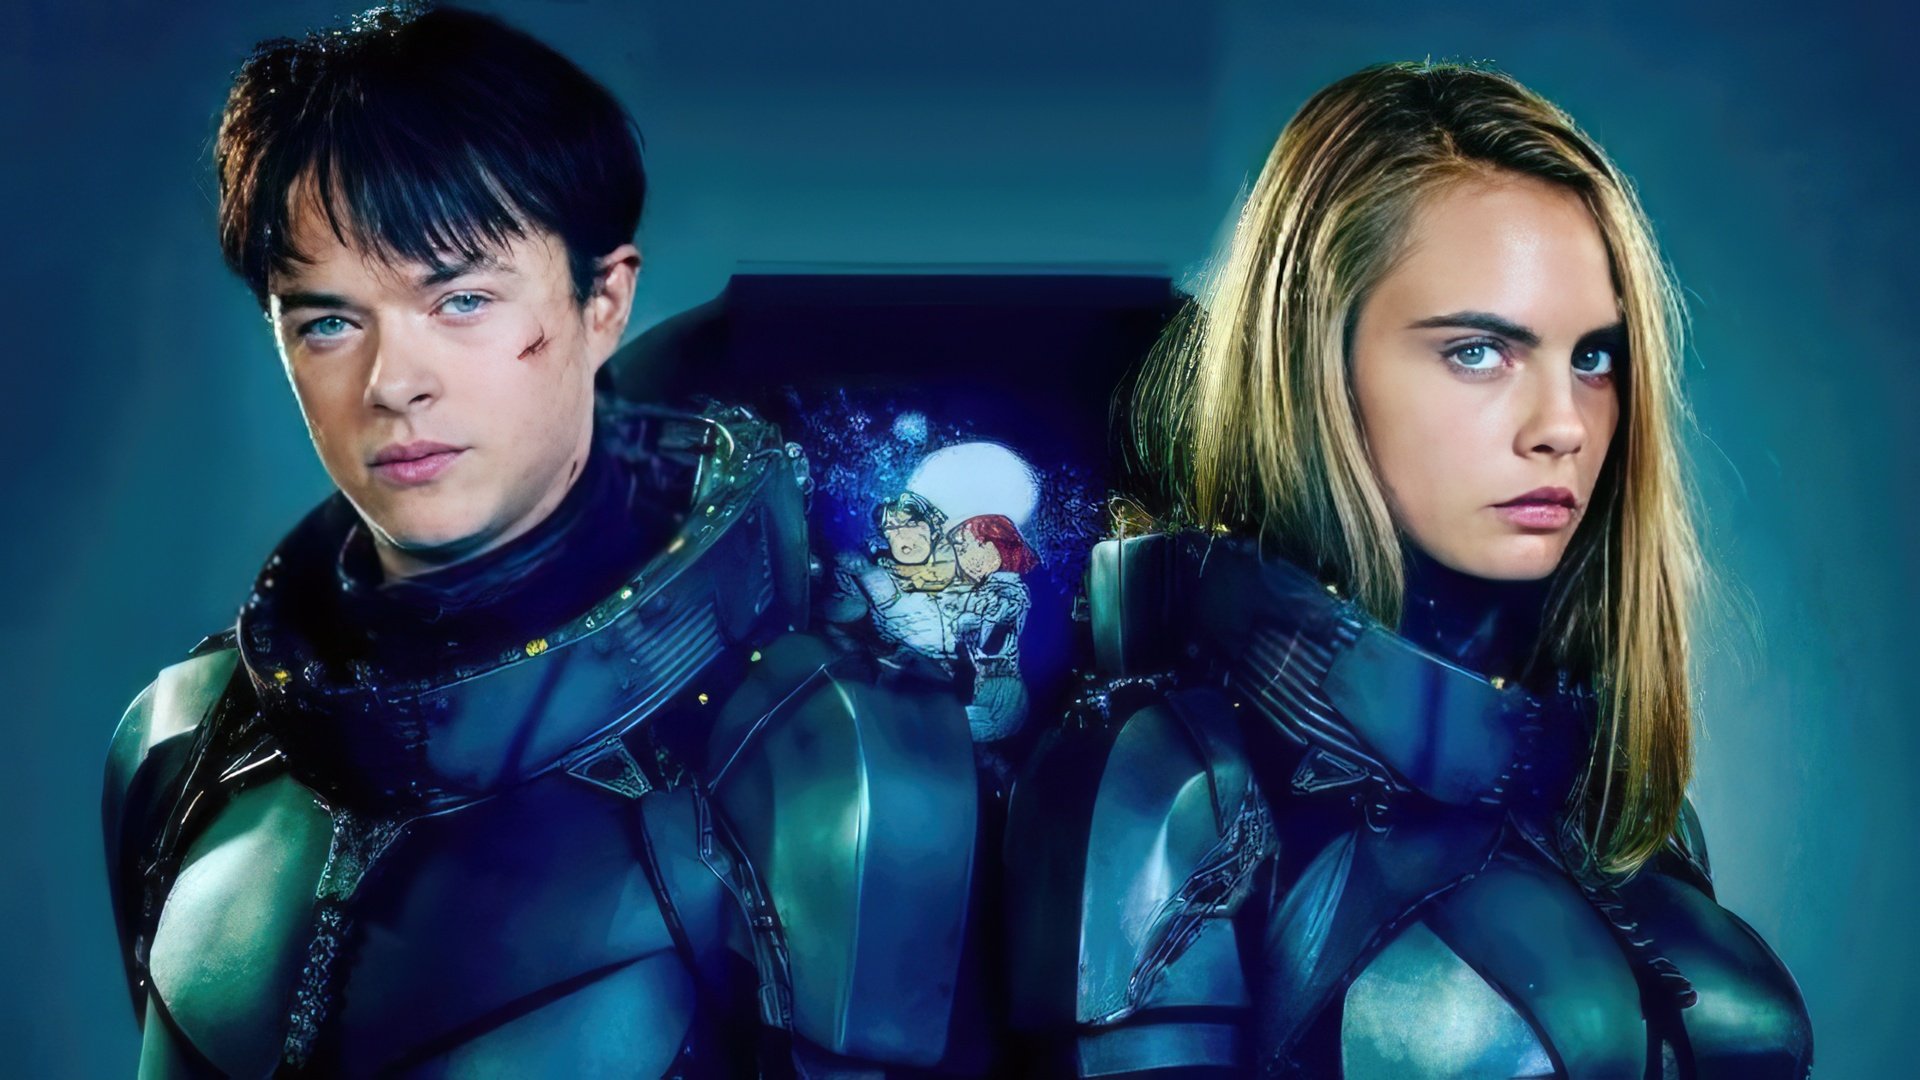 Dane DeHaan and Cara Delevingne («Valerian and the City of a Thousand Planets»)